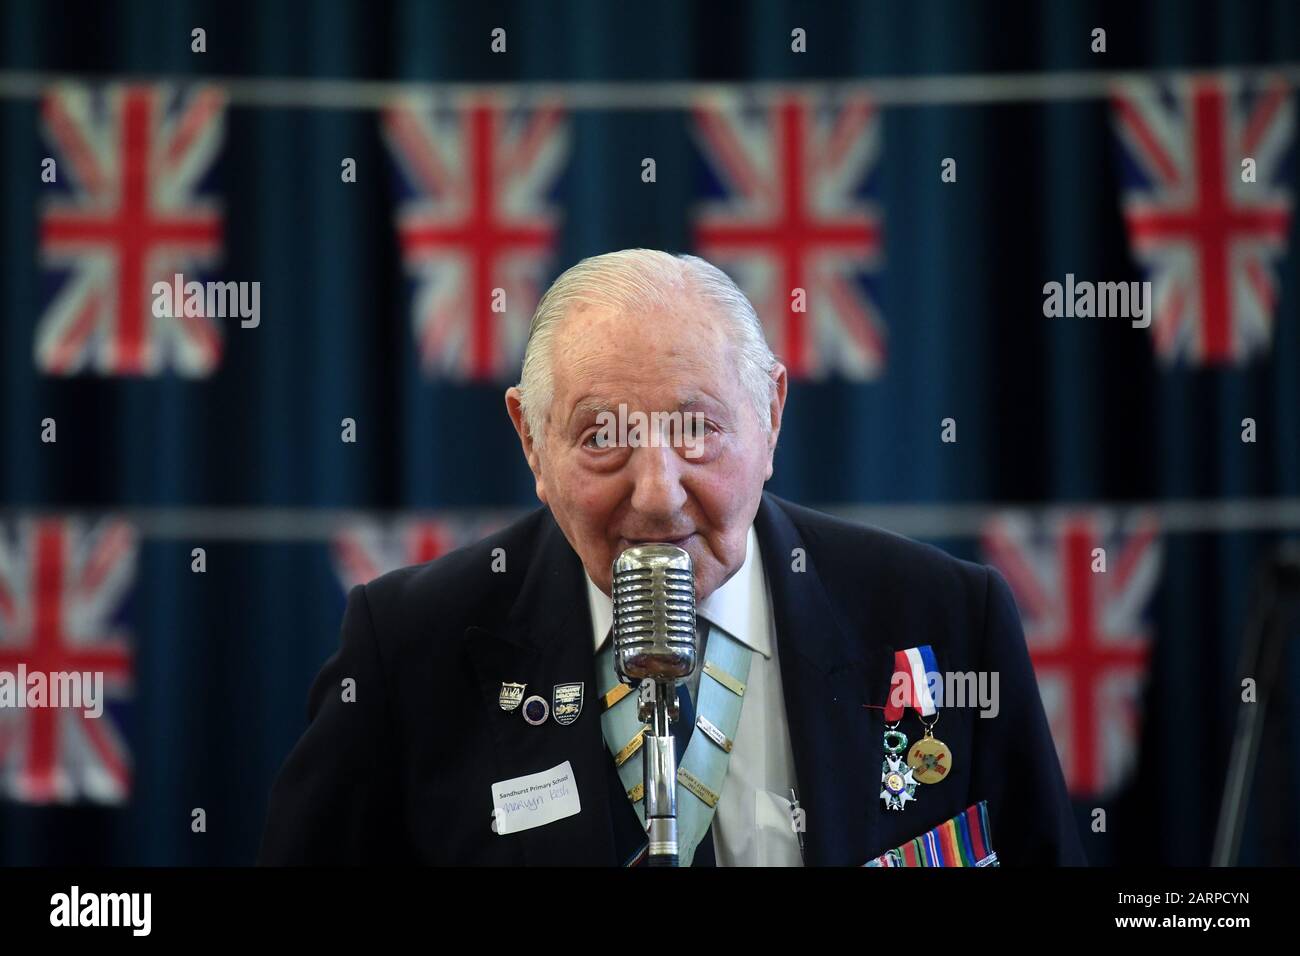 WW2 veteran Mervyn Kerch, 95, who was involved in the D-Day Landings, speaks to pupils at Sandhurst Primary School in south east London, to raise awareness of the 75th anniversaries of VE and VJ day later this year. Stock Photo